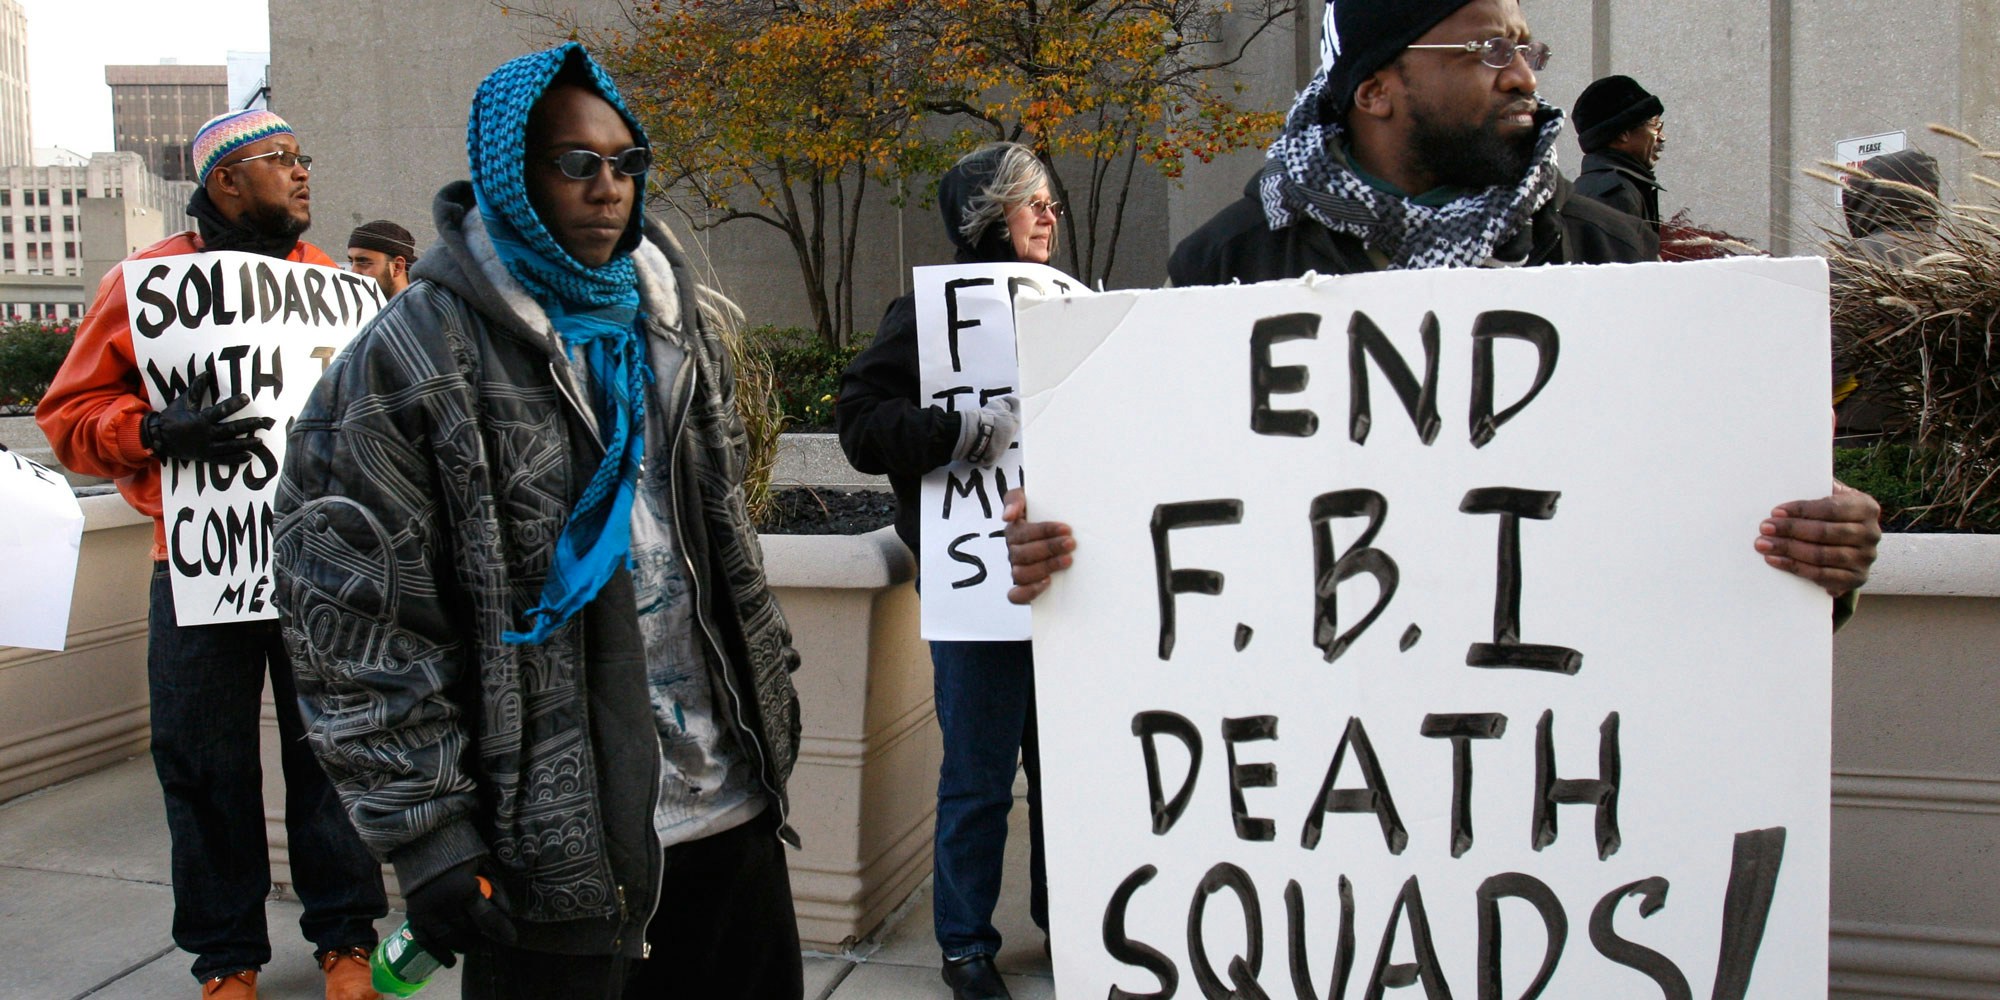 Akil Fahd, right, protests with others outside the McNamara Federal Building in Detroit, Thursday, Nov. 5, 2009. The protesters want an independent investigation into the death of Luqman Ameen Abdullah, a Detroit imam killed in a shootout with federal agents.   (AP Photo/Carlos Osorio)